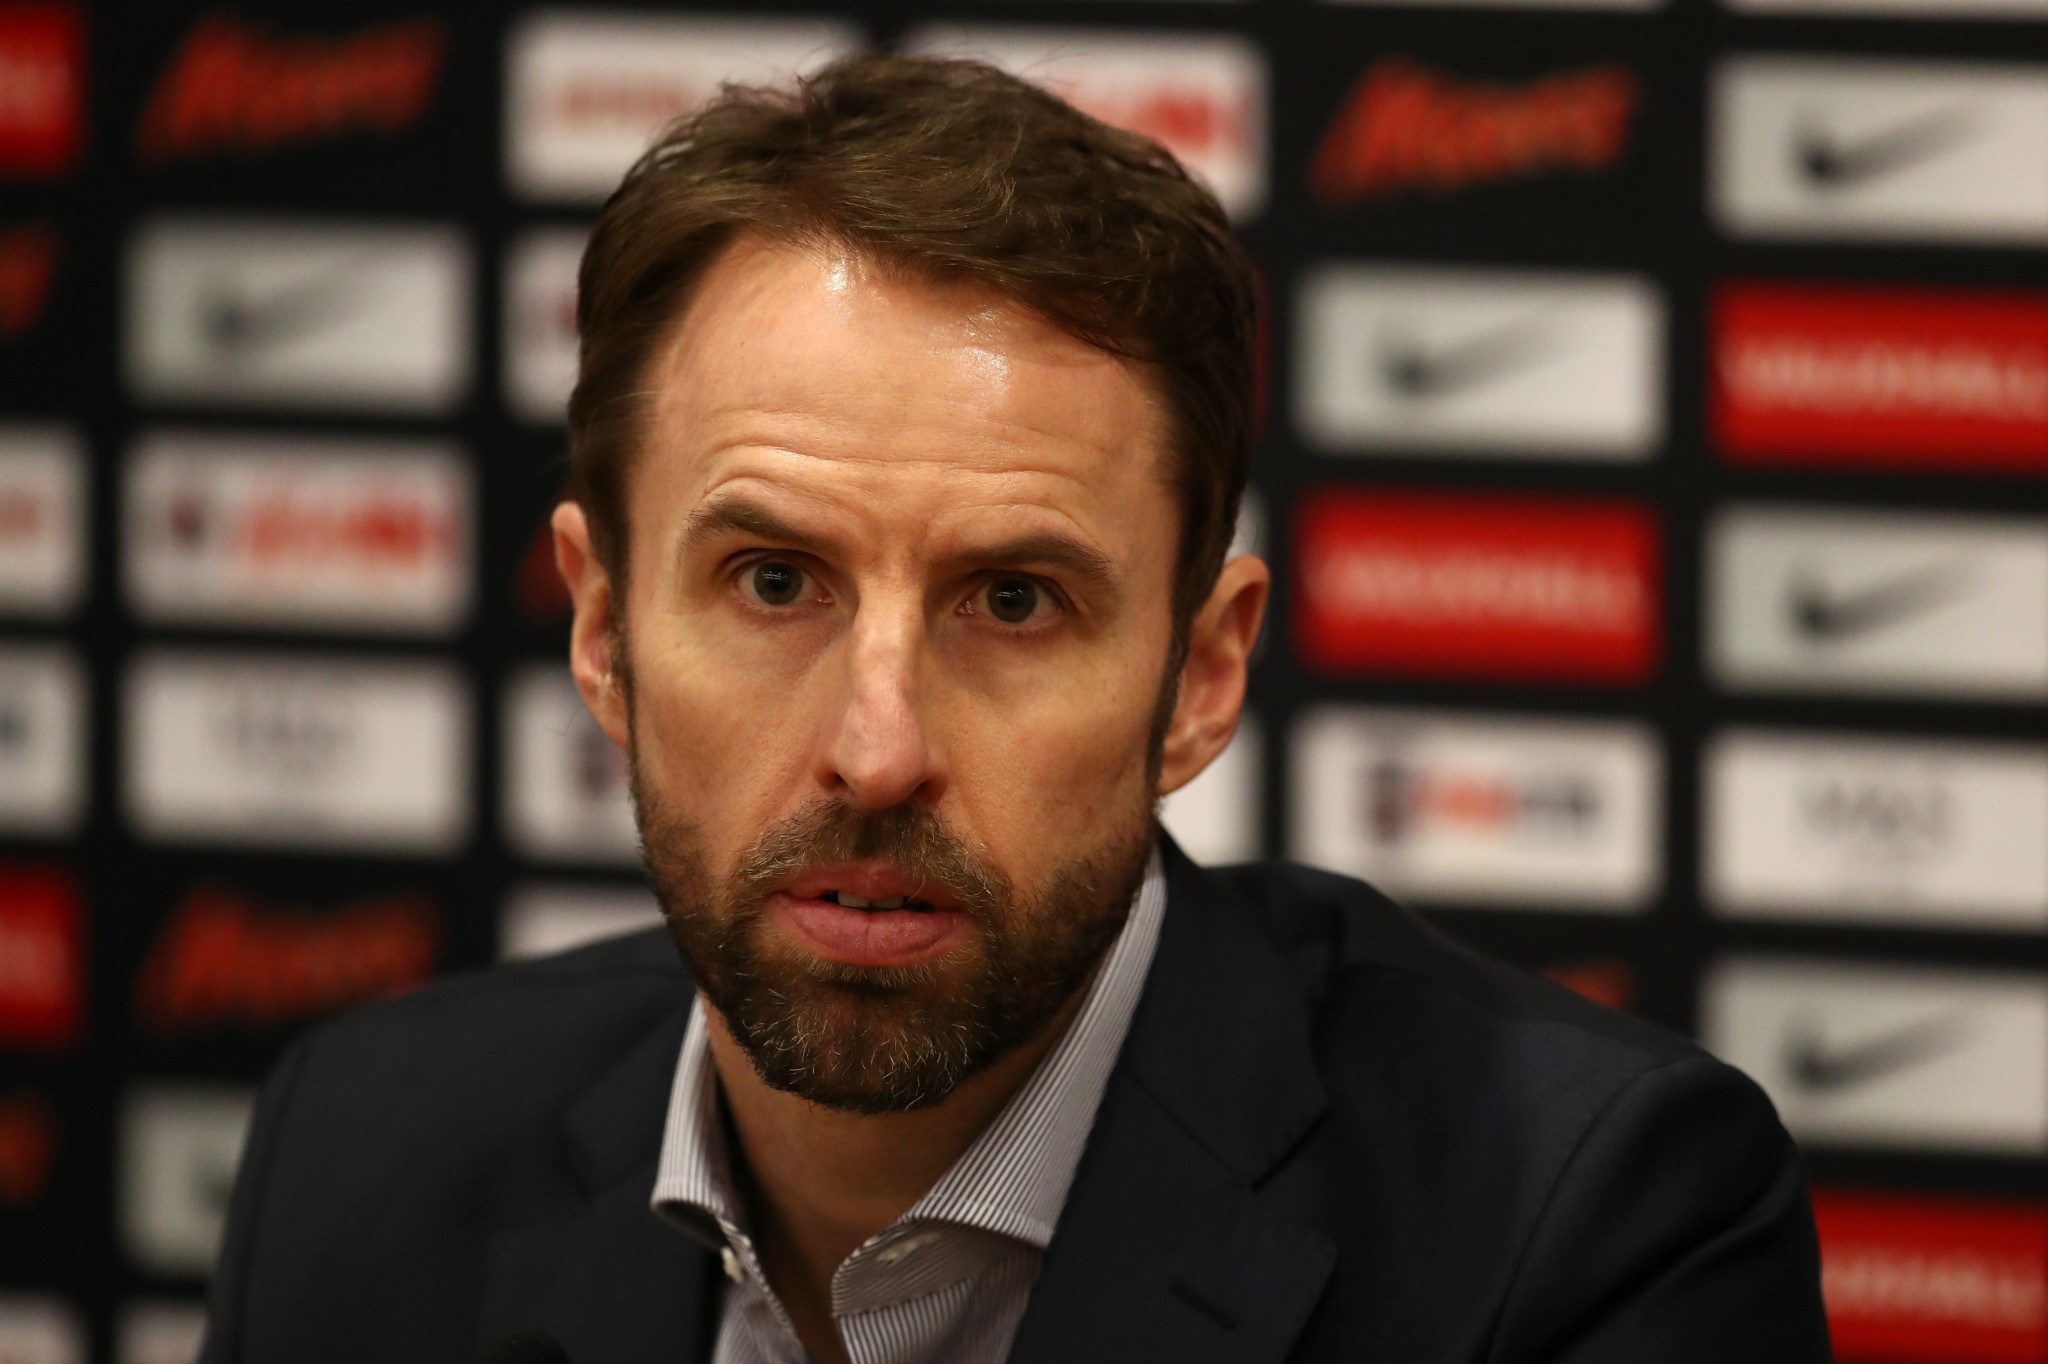 England manager Gareth Southgate claimed last week that the national team were preparing to compete at the World Cup and there were no plans to boycott despite the current political situation between Britain and Russia ©Getty Images